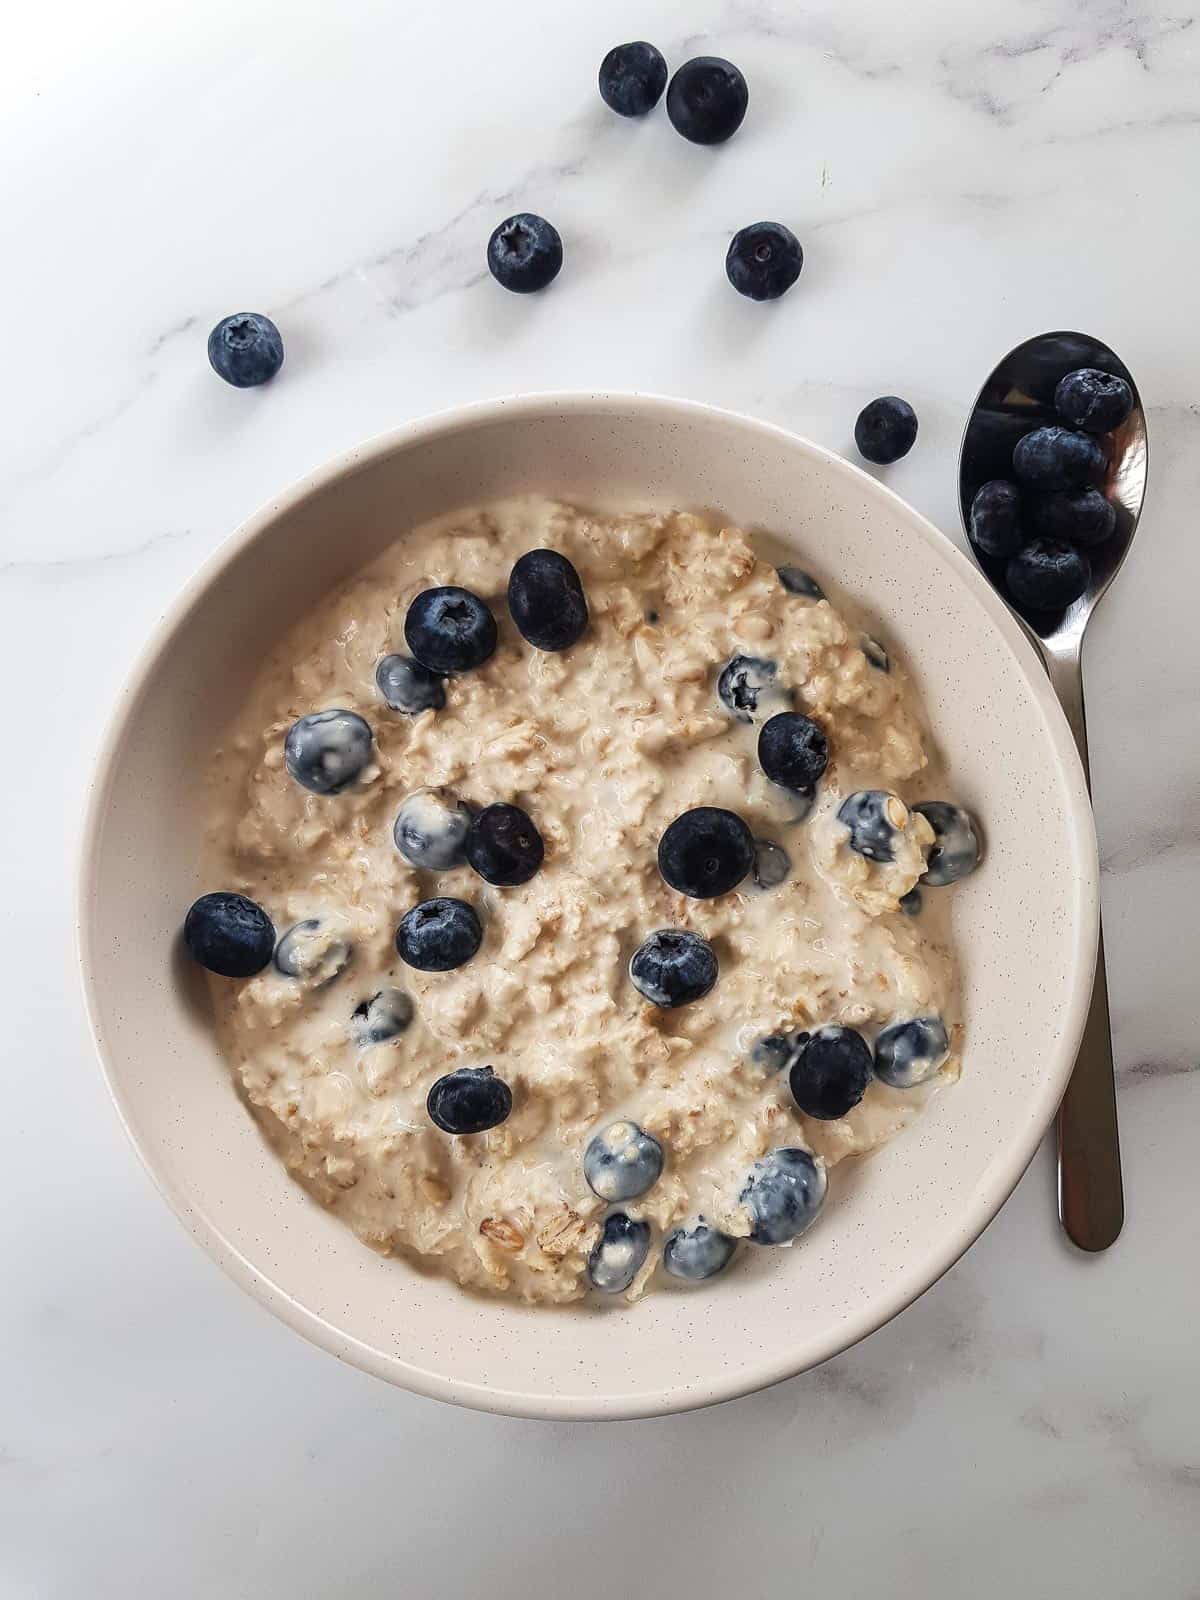 Blueberry overnight oats in a bowl, topped with blueberries.